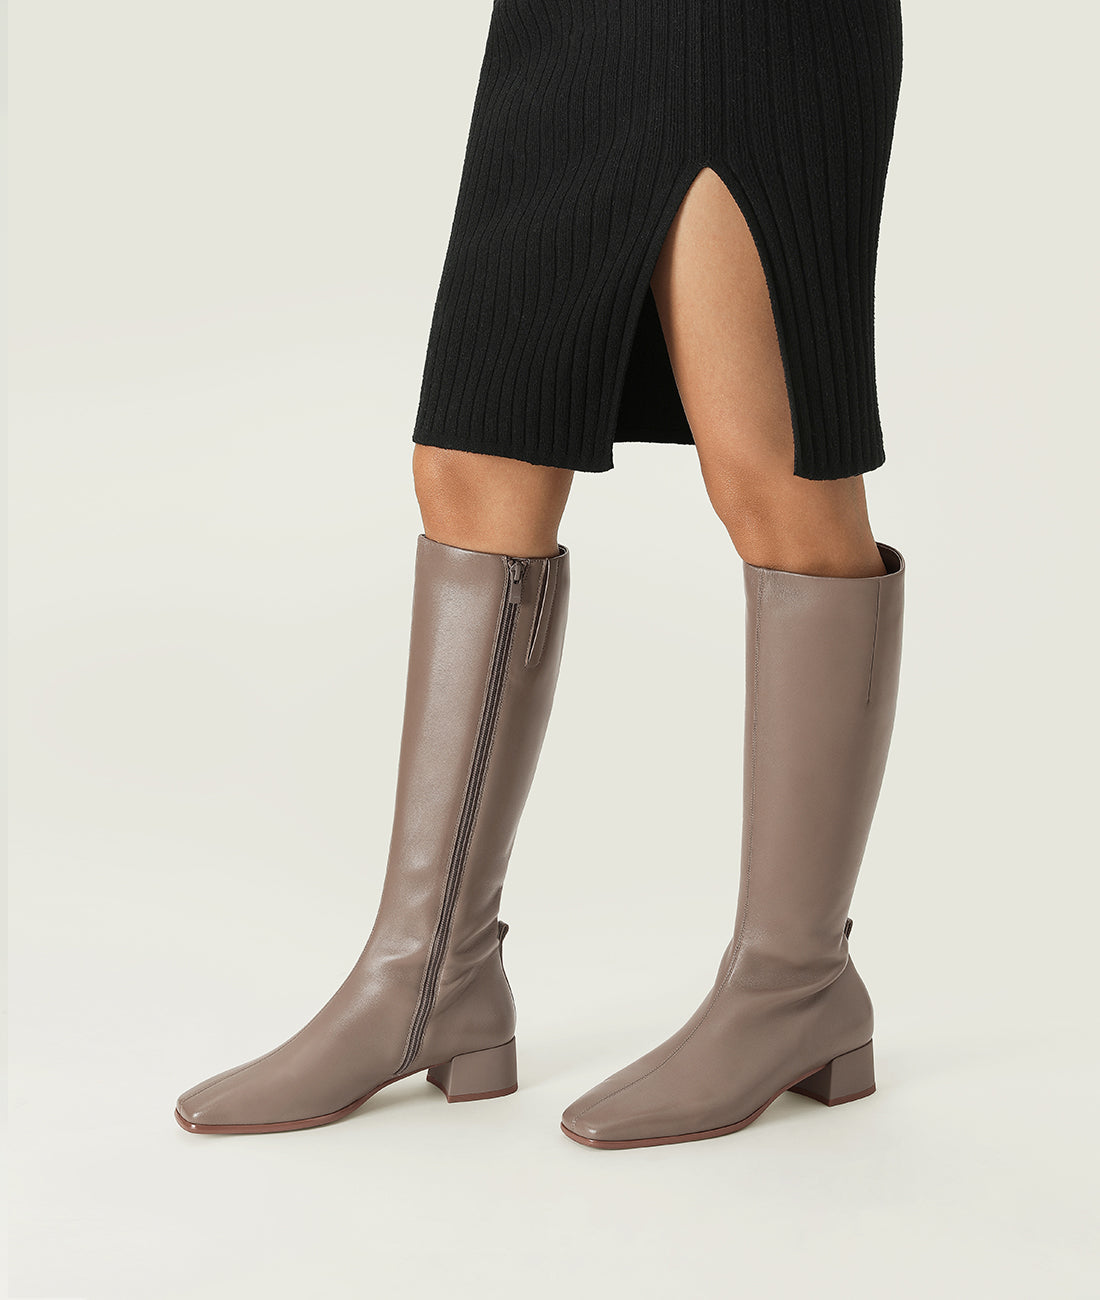 7or9 - Milk Coffee (Knee-High Boot) - Warmtech Boots